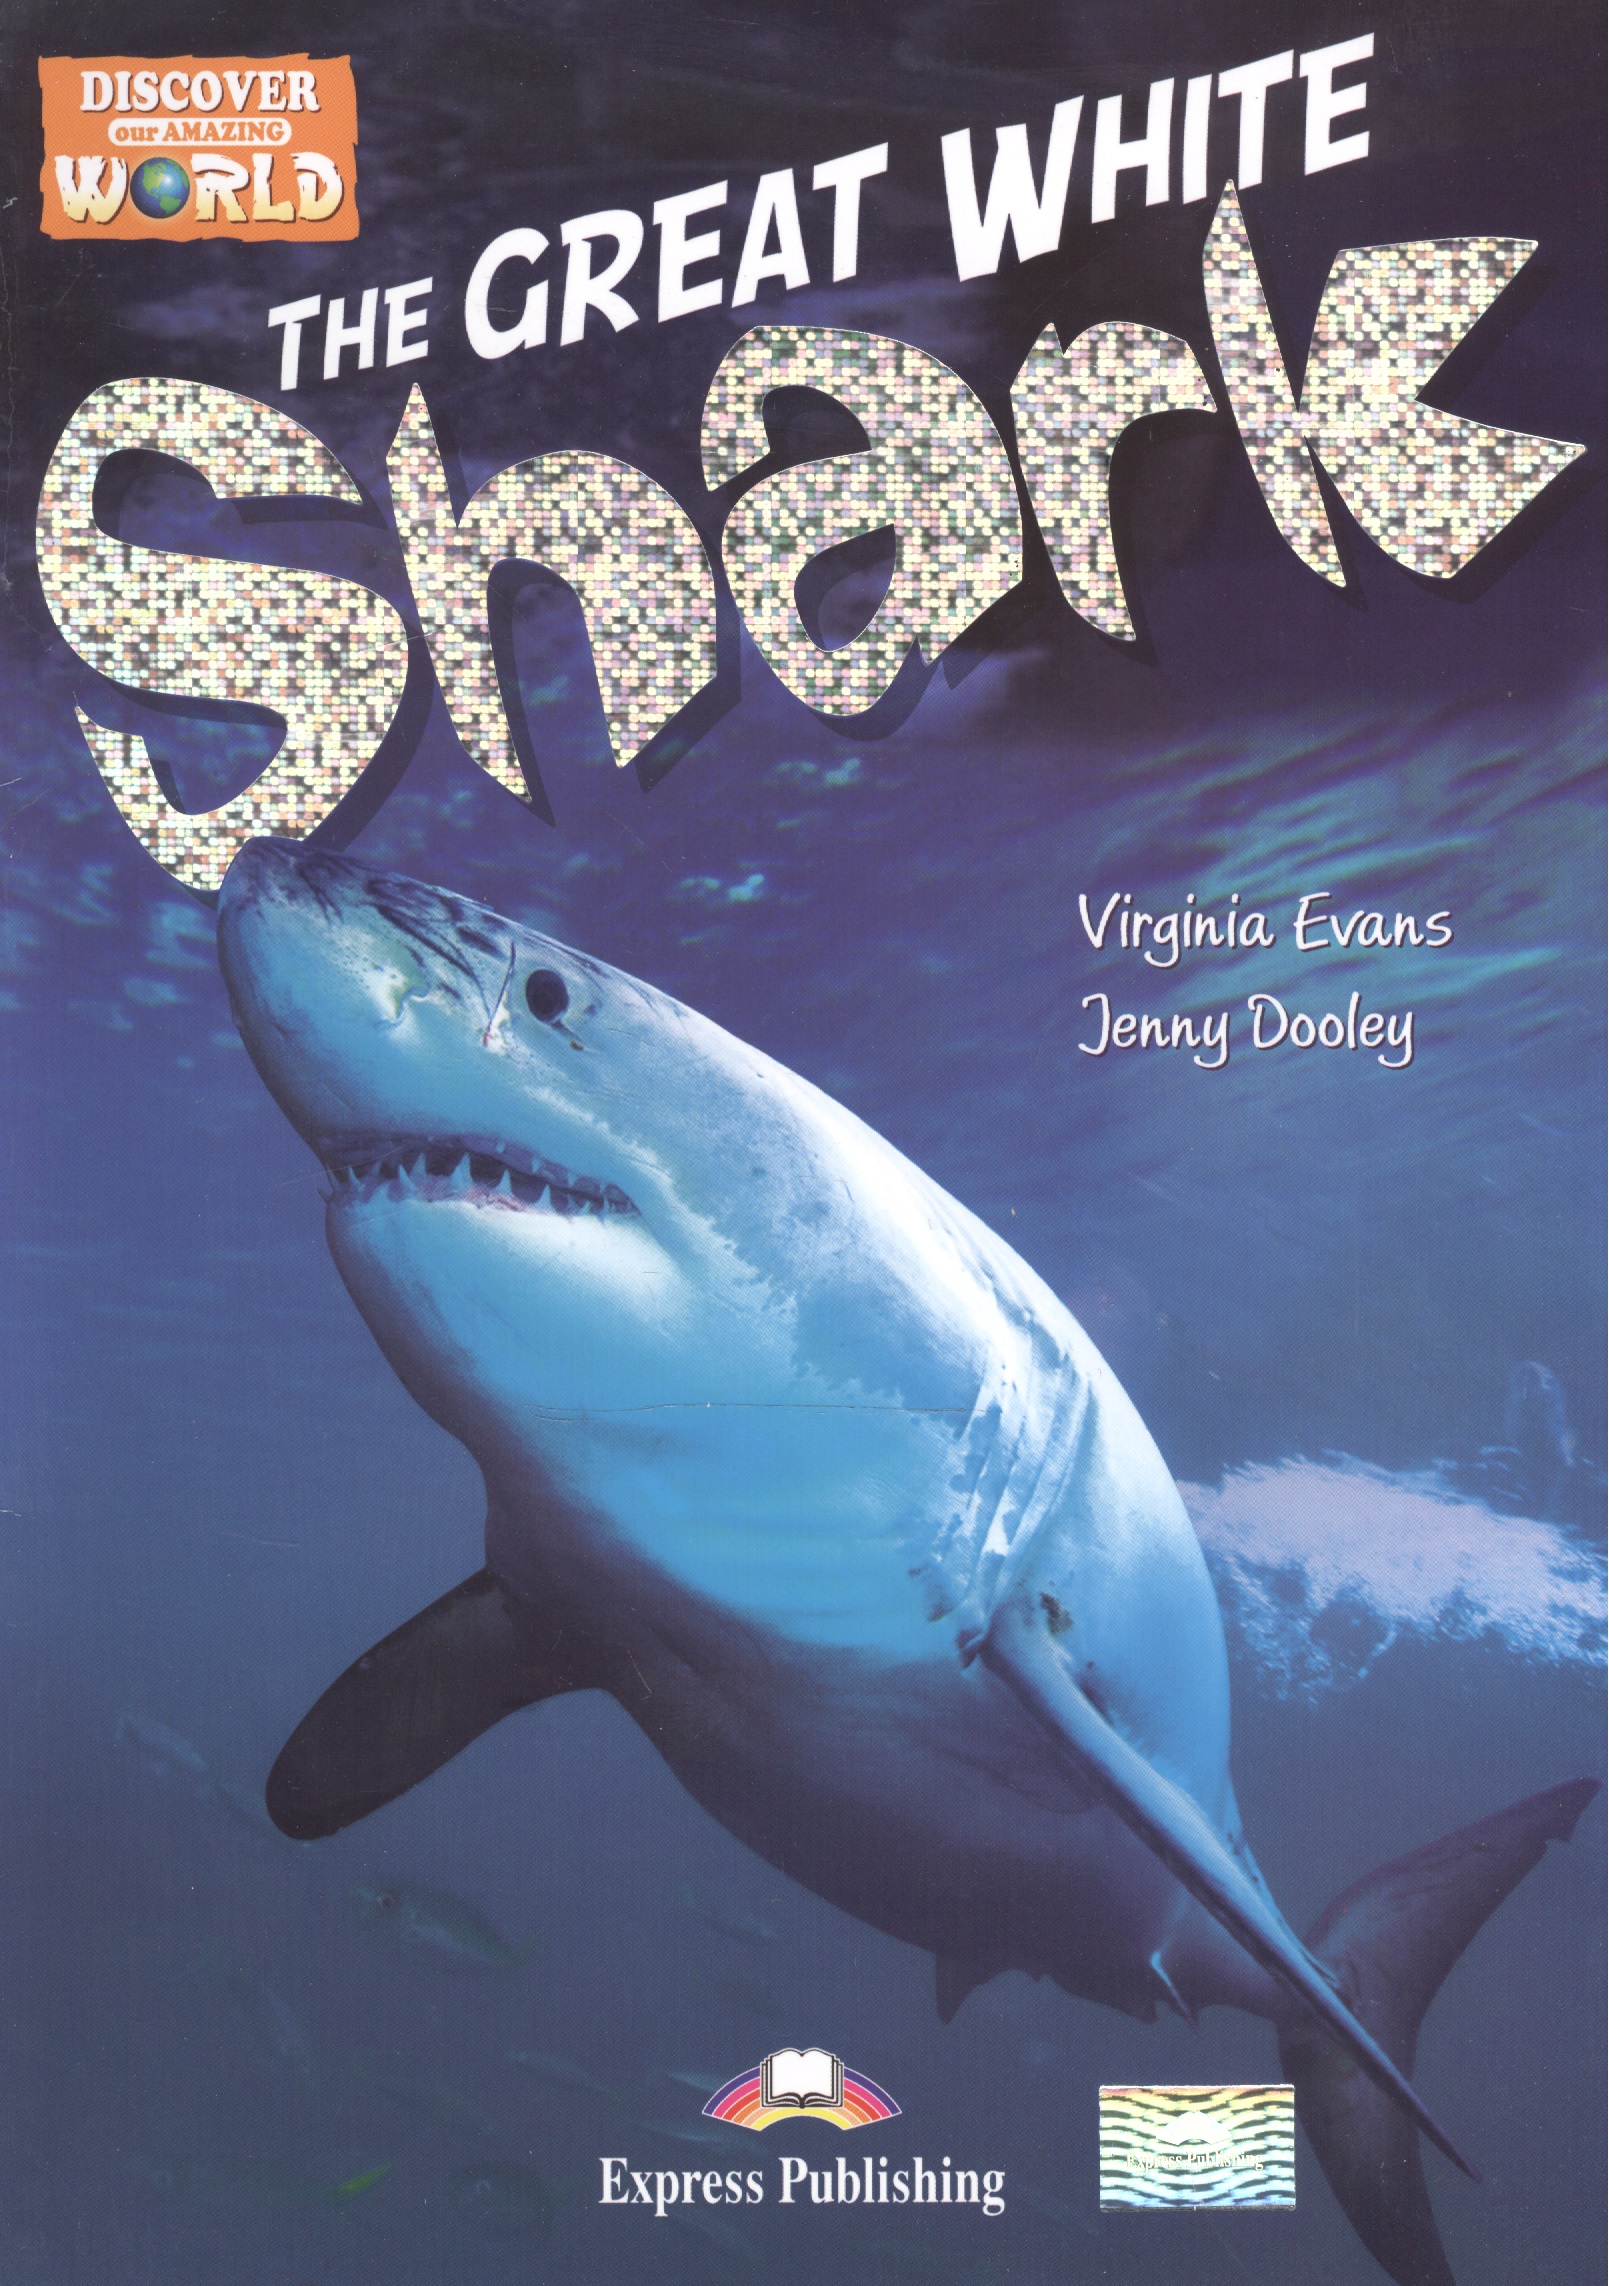 The Great White Shark. Reader. Книга для чтения saenz b aristotle and dante discover the secrets of the universe